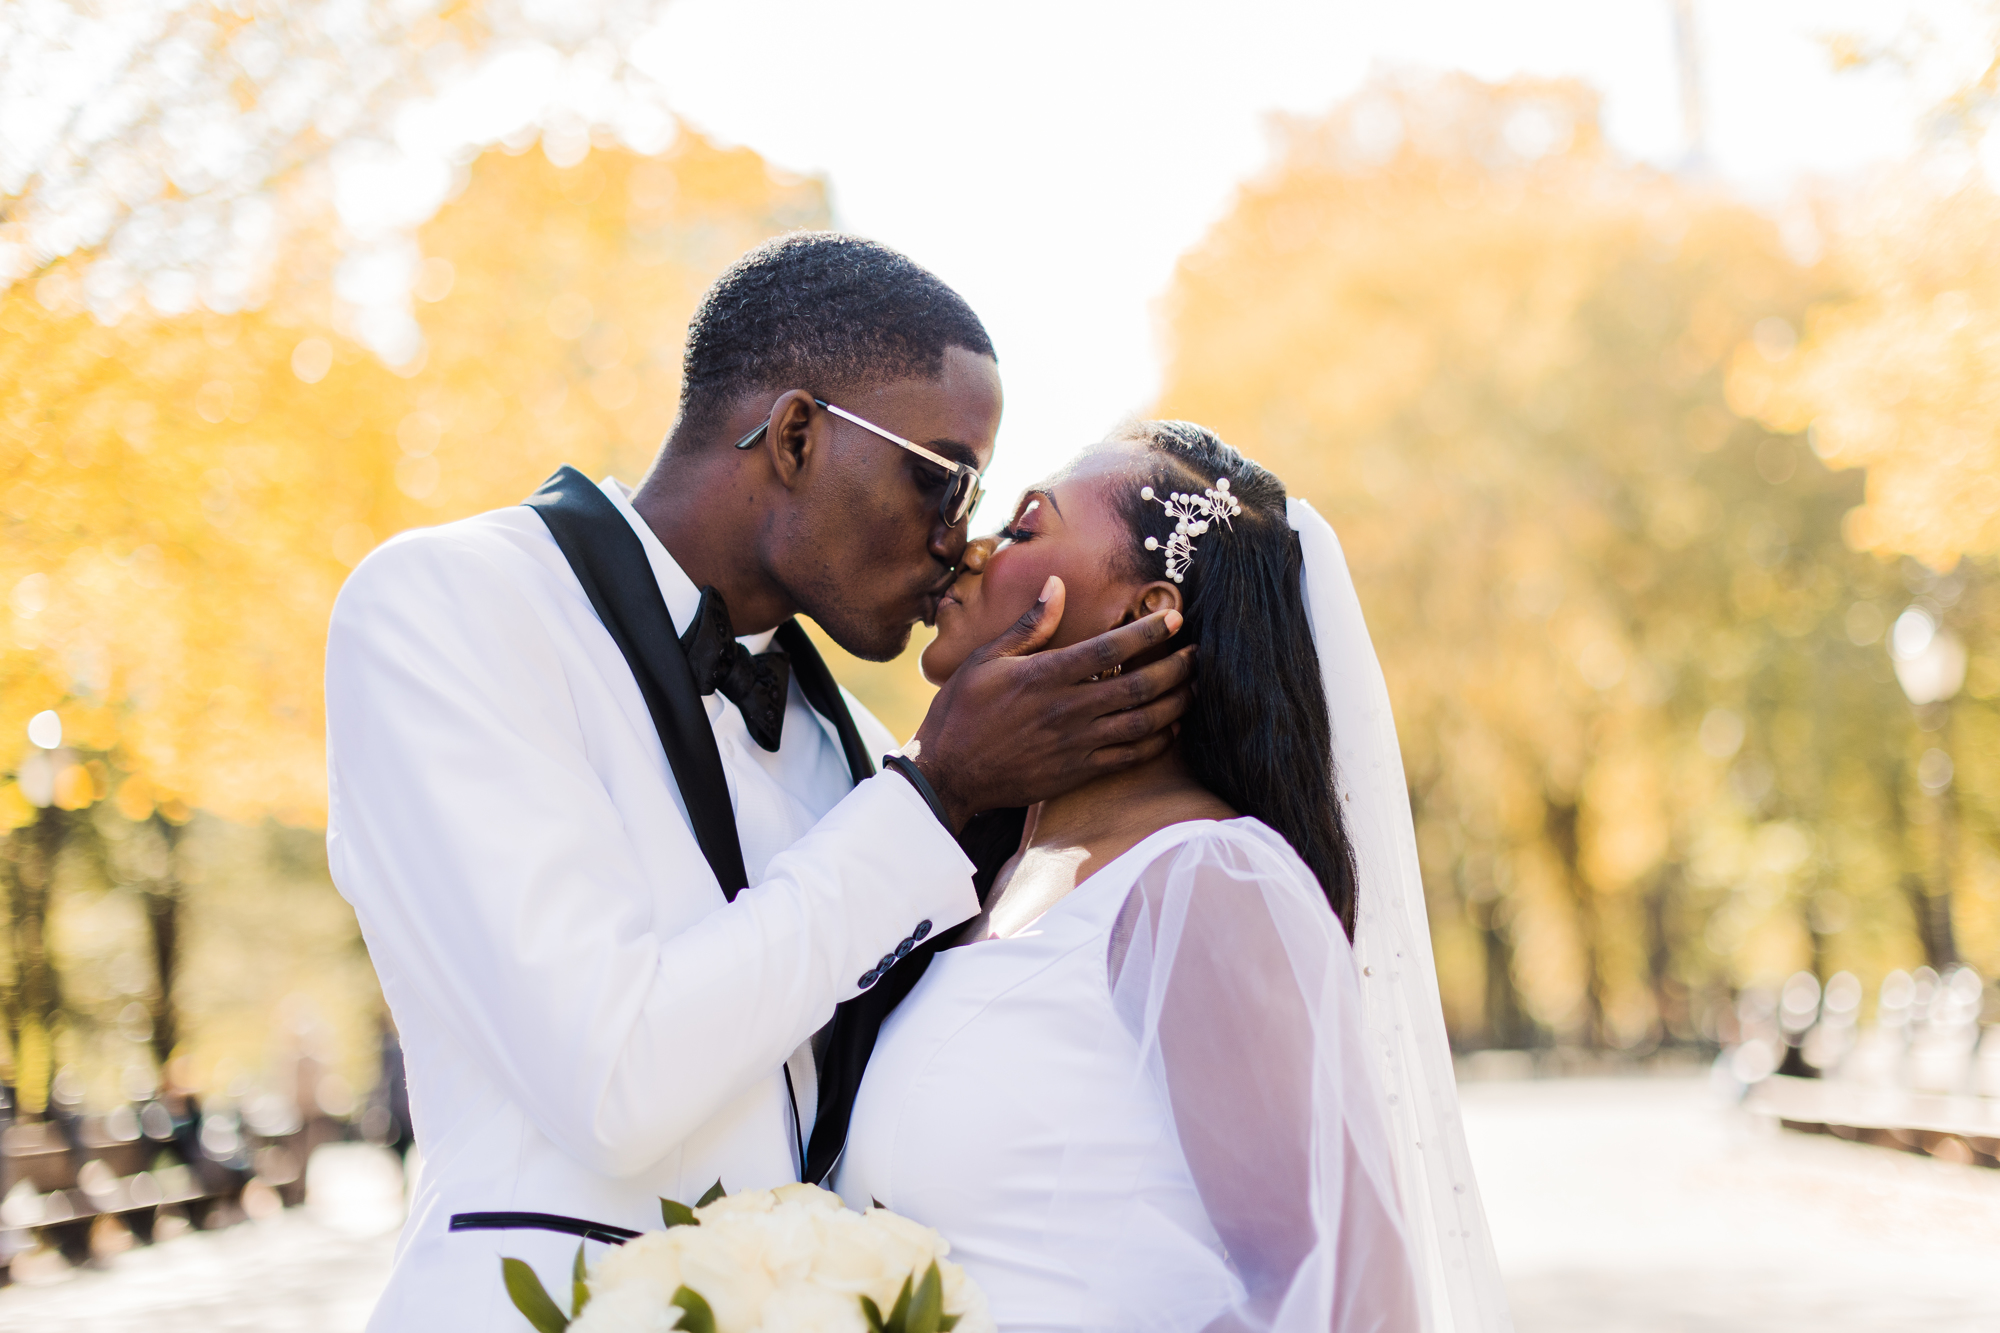 Emotional Central Park Wedding Photos on Cherry Hill in Fall